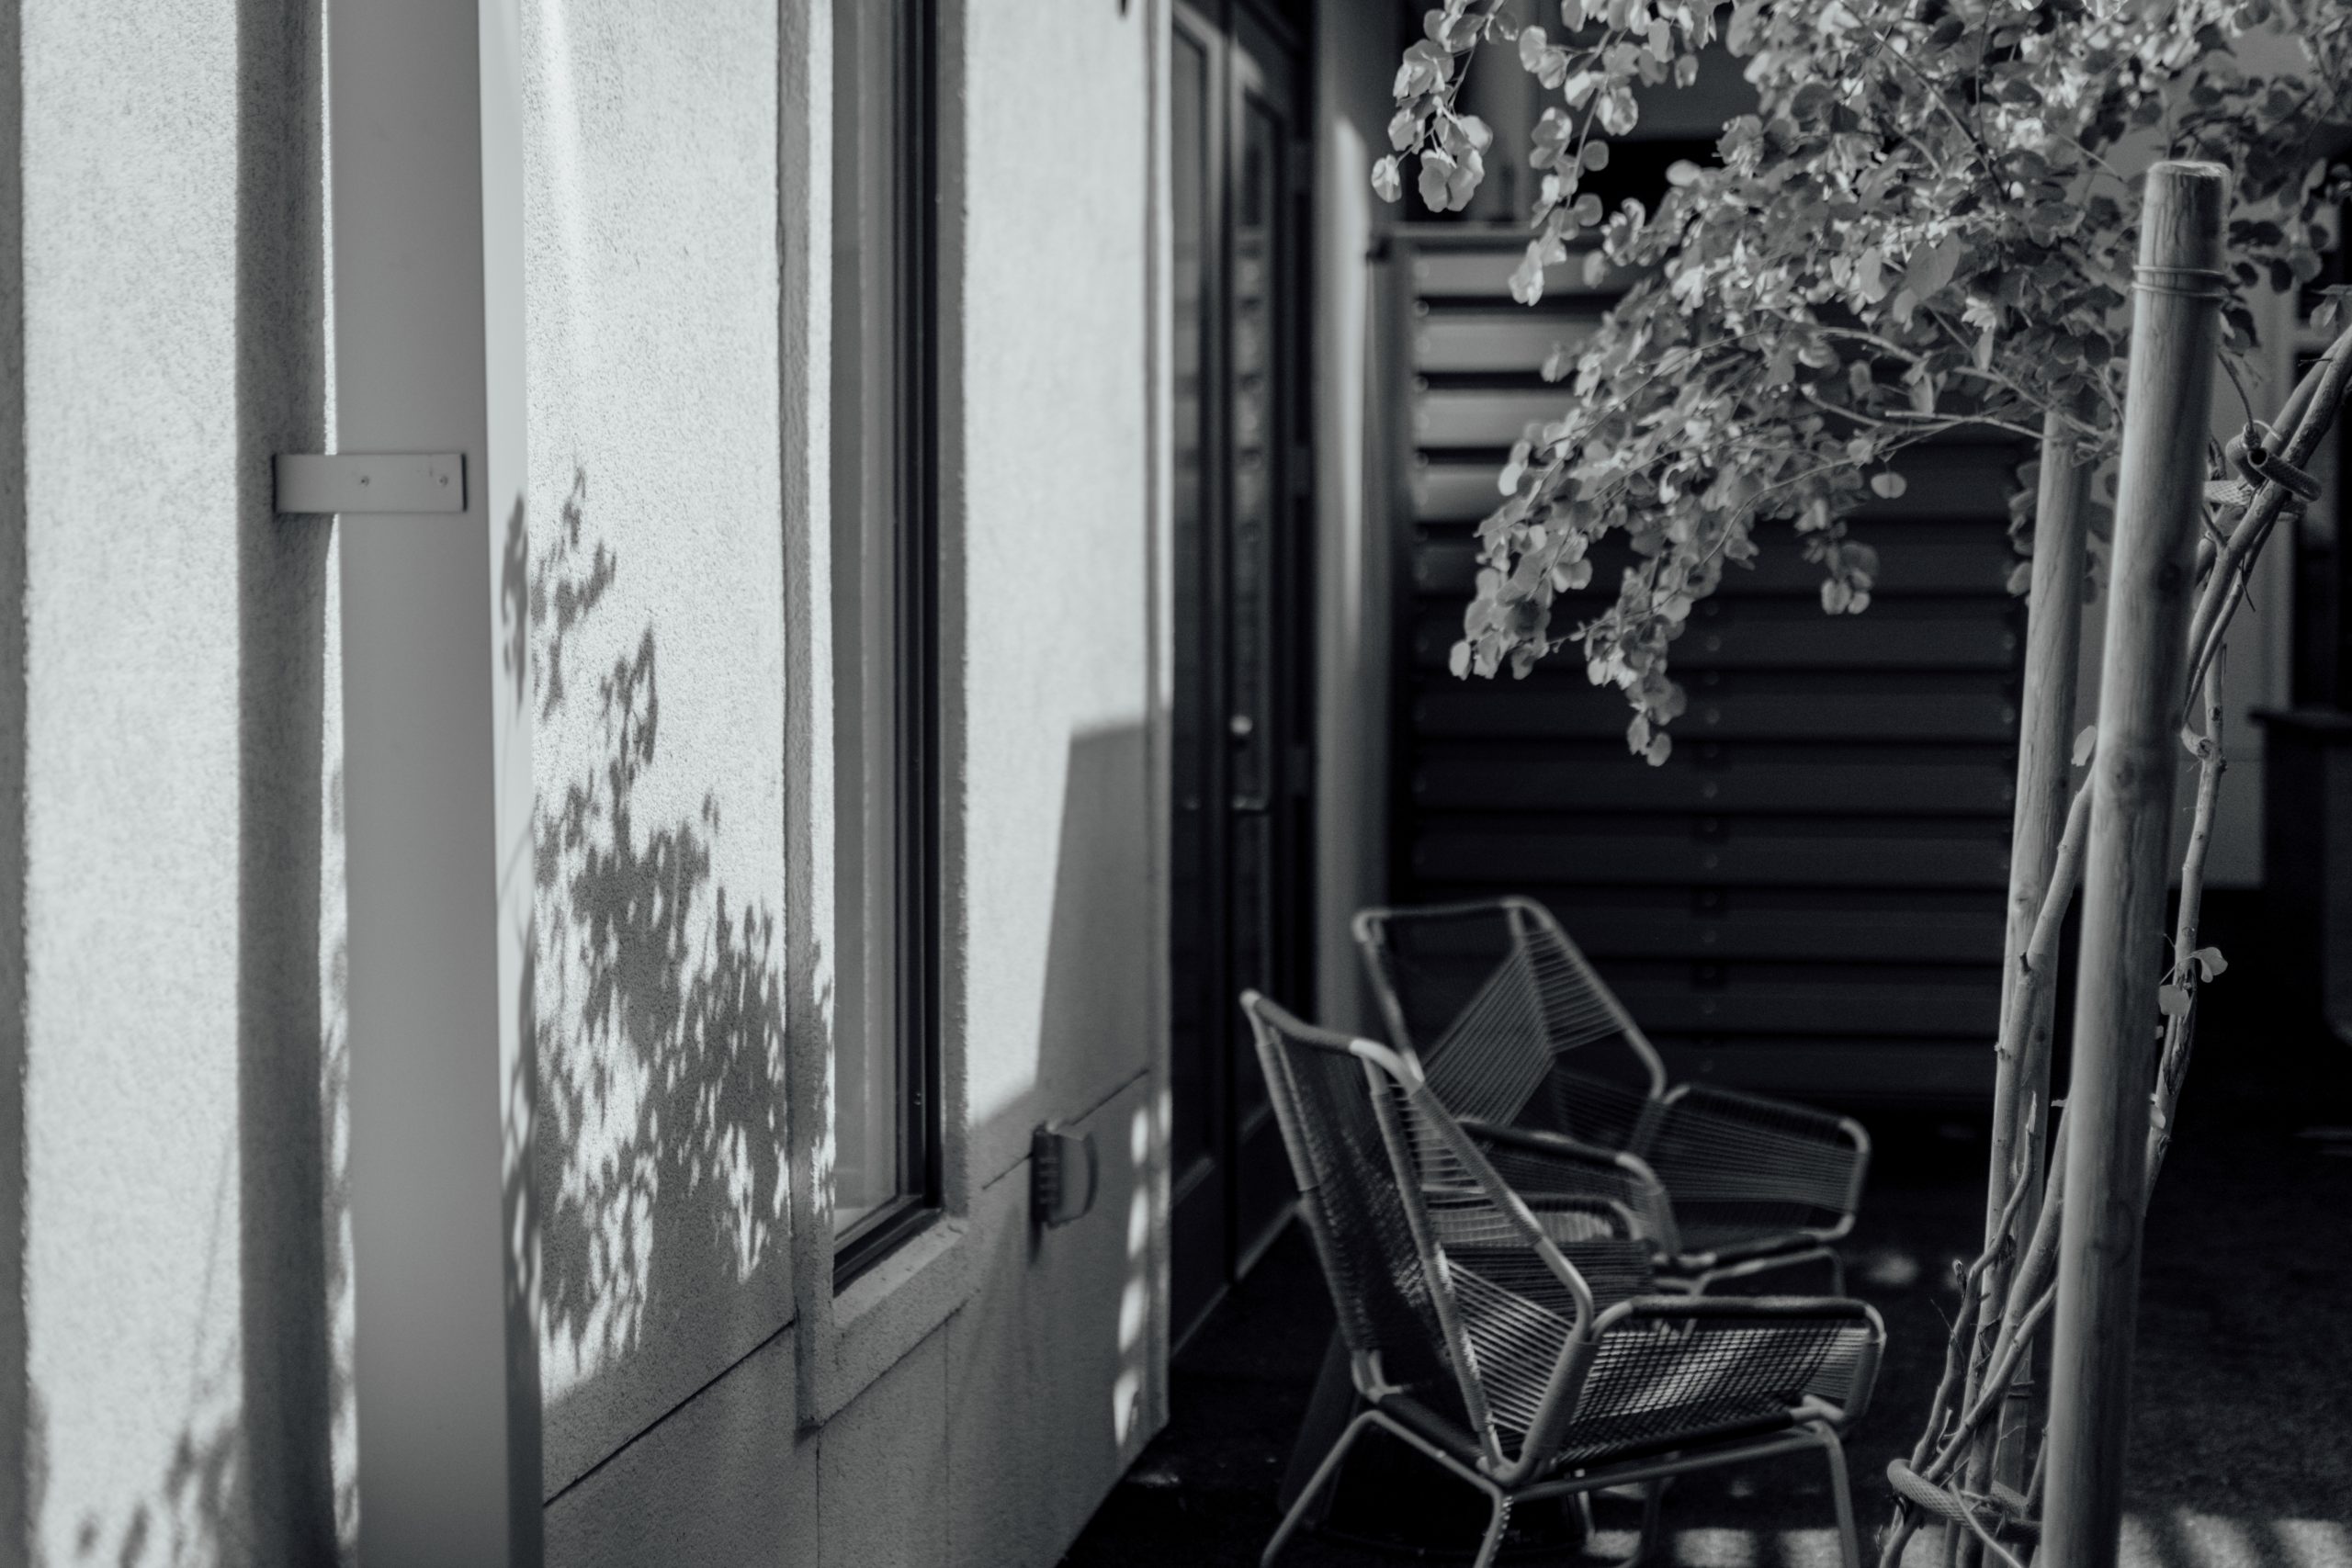 Black and white photo of some outdoor chairs in shadow.